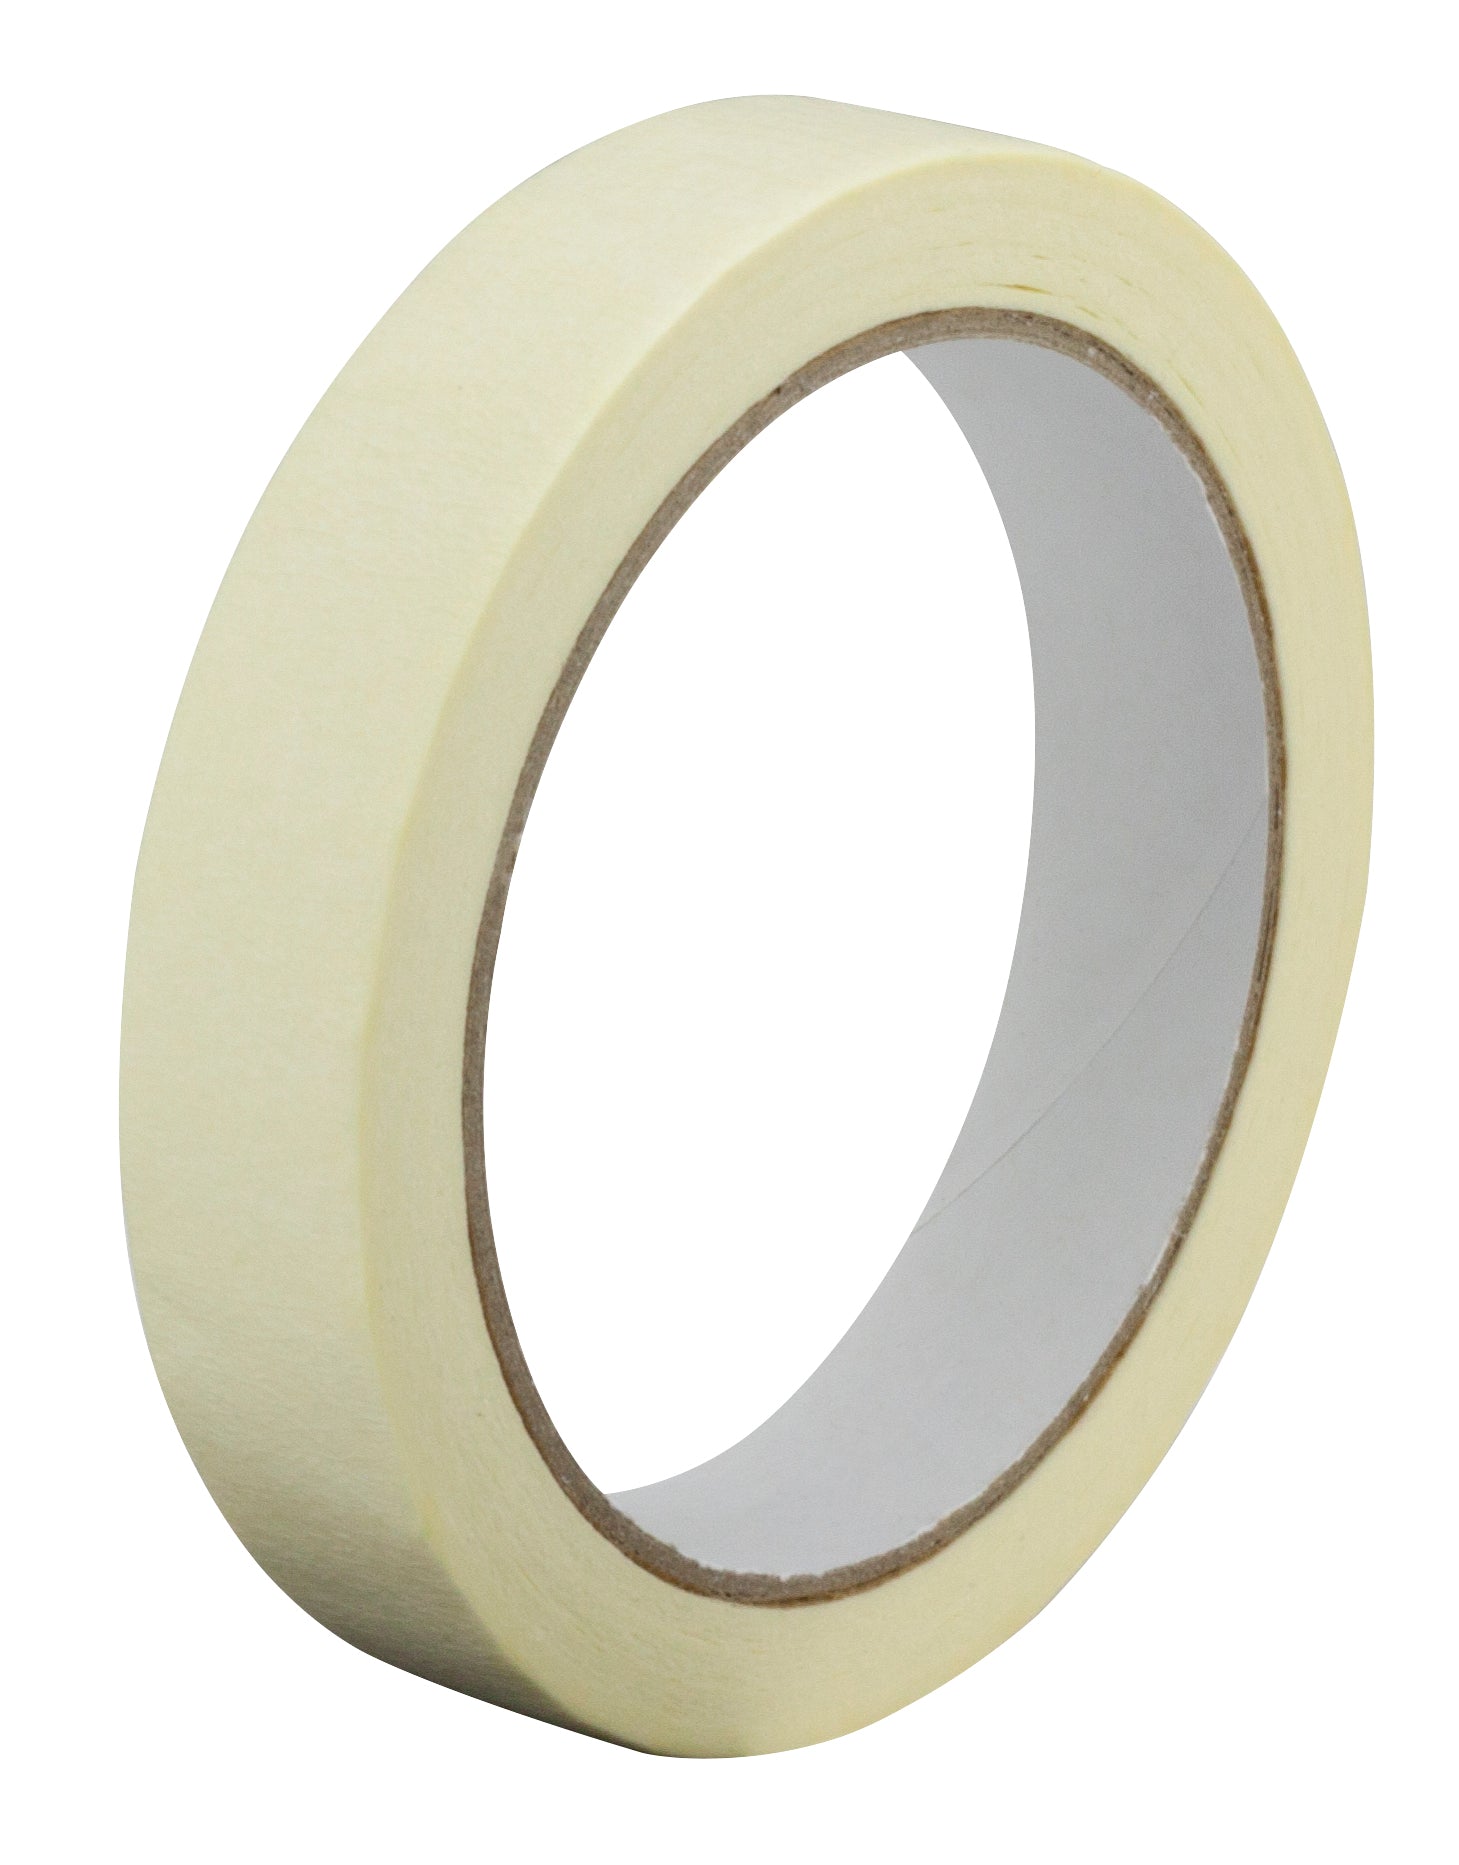 Masking Tape 19mm x 25m (General Purpose) 0.12mm Thickness  - Per Pack